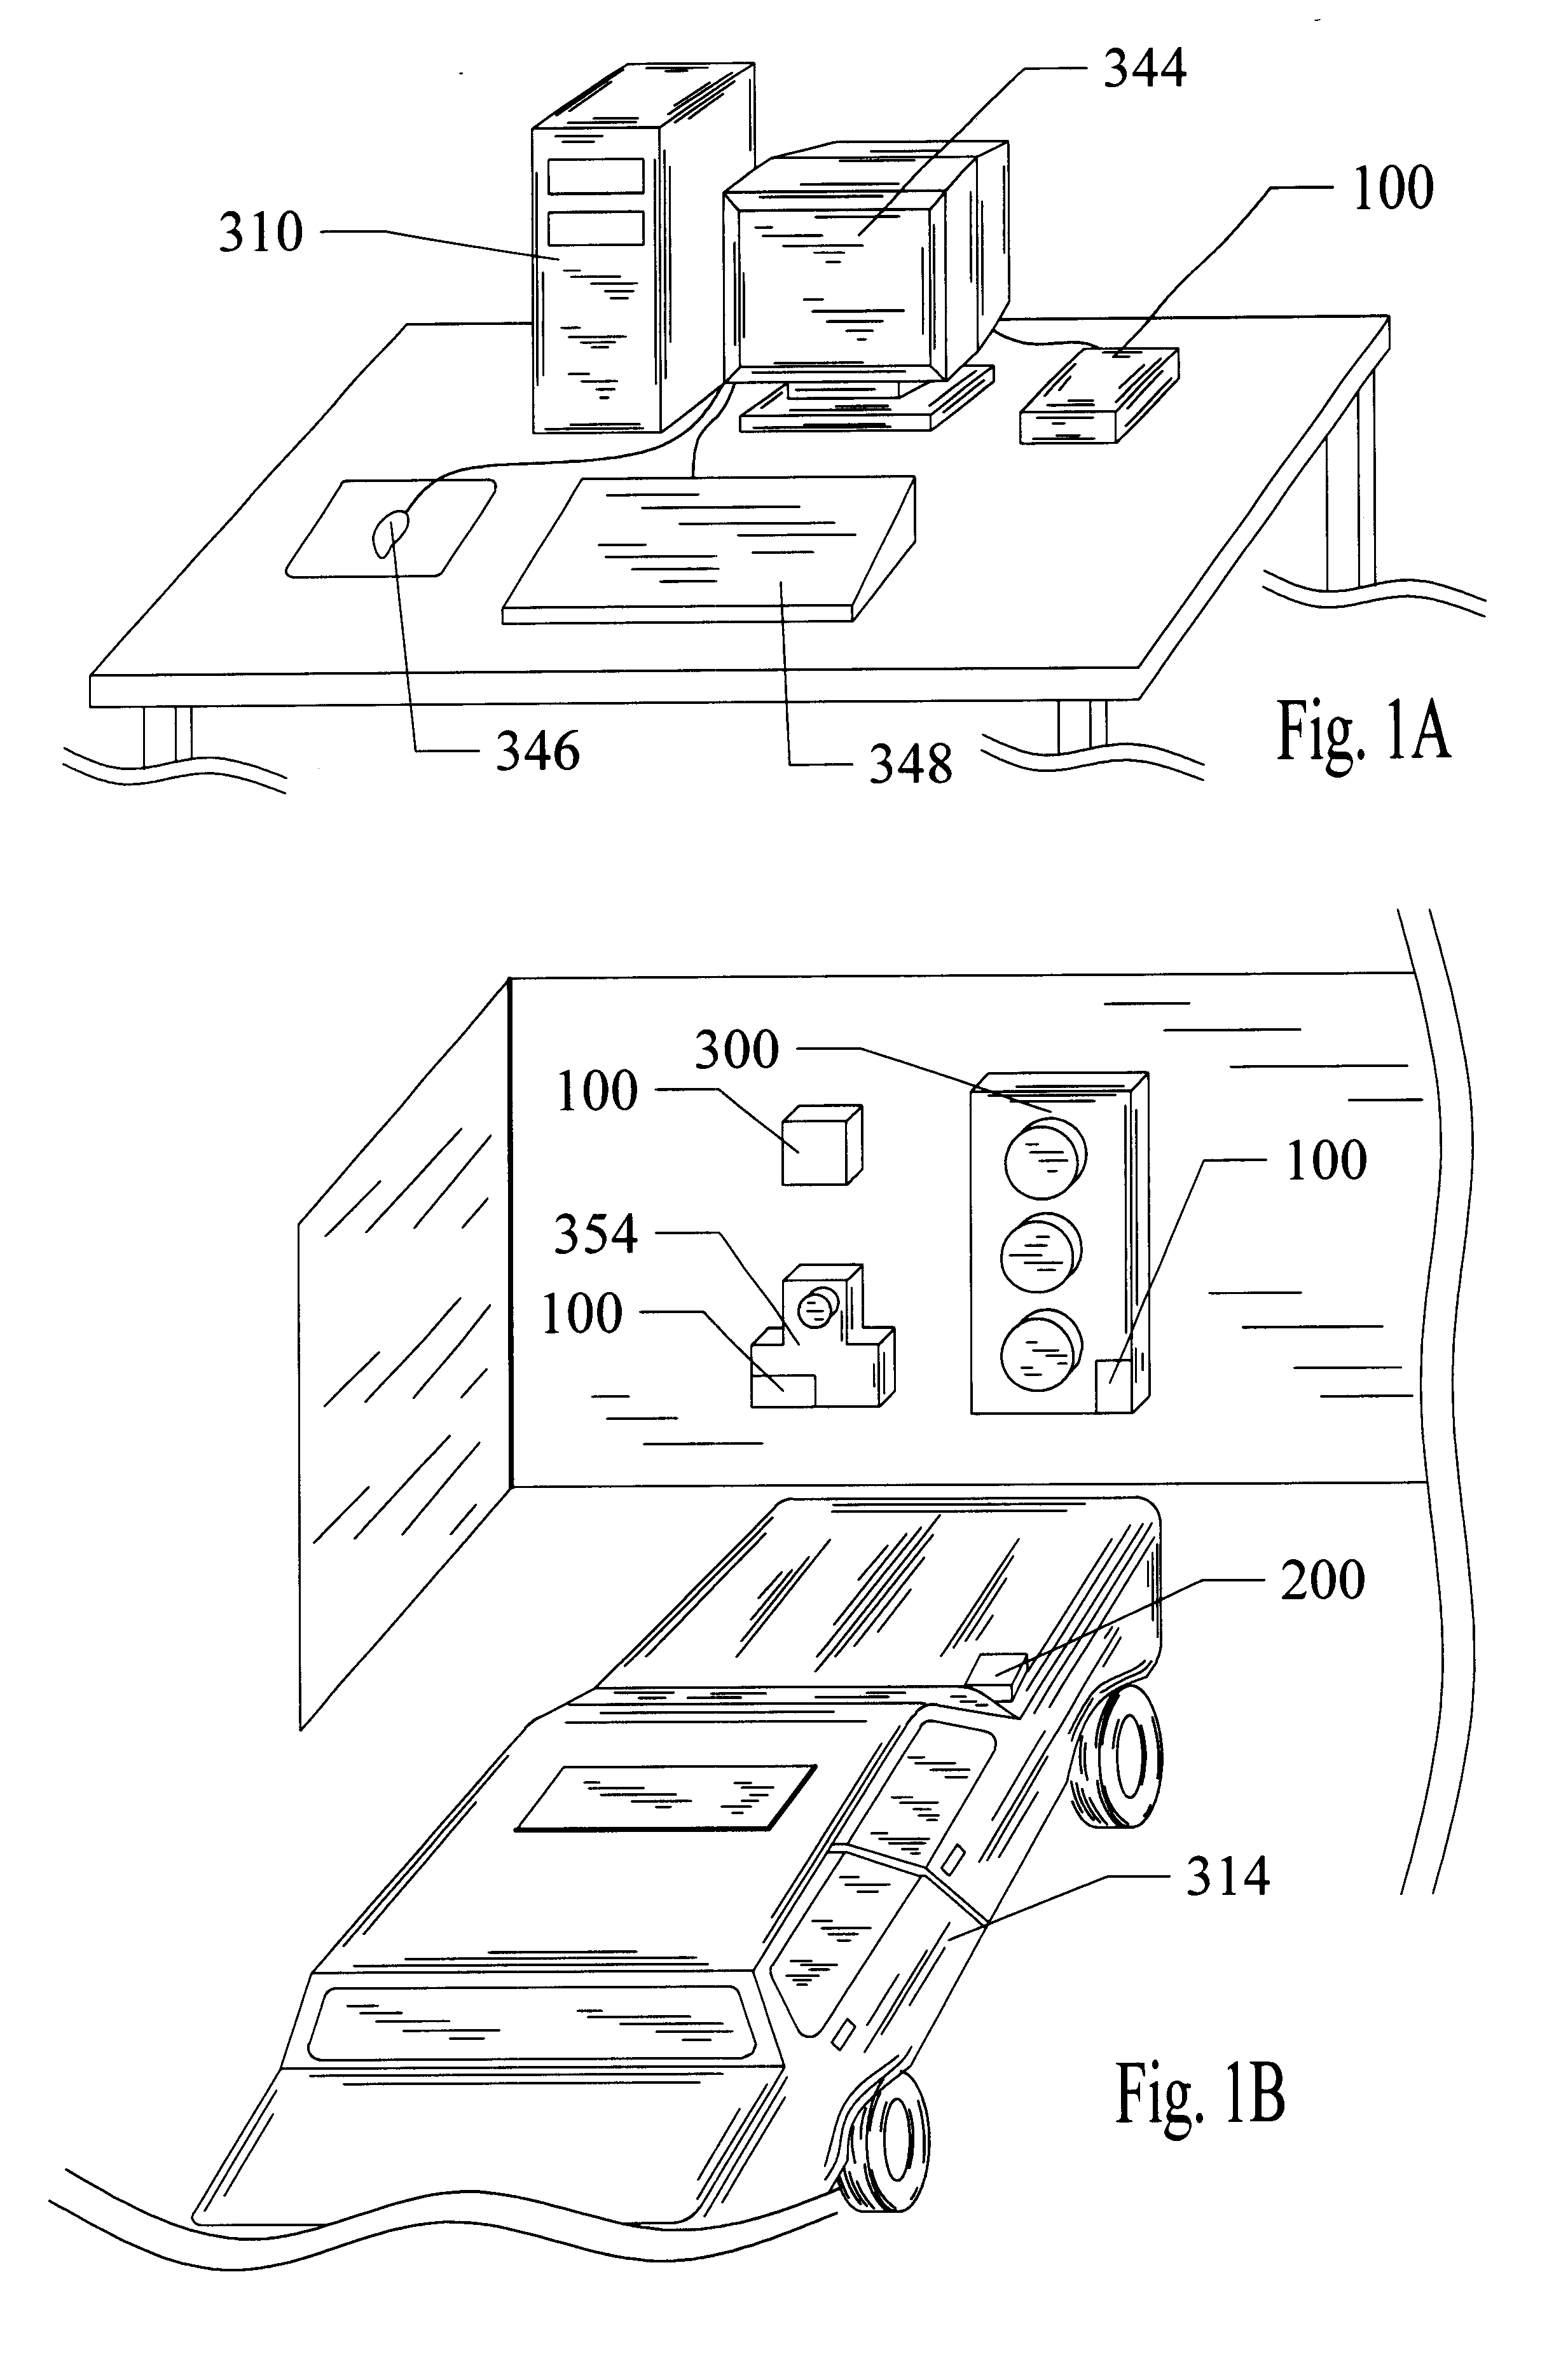 In-vehicle device for wirelessly connecting a vehicle to the internet and for transacting e-commerce and e-business